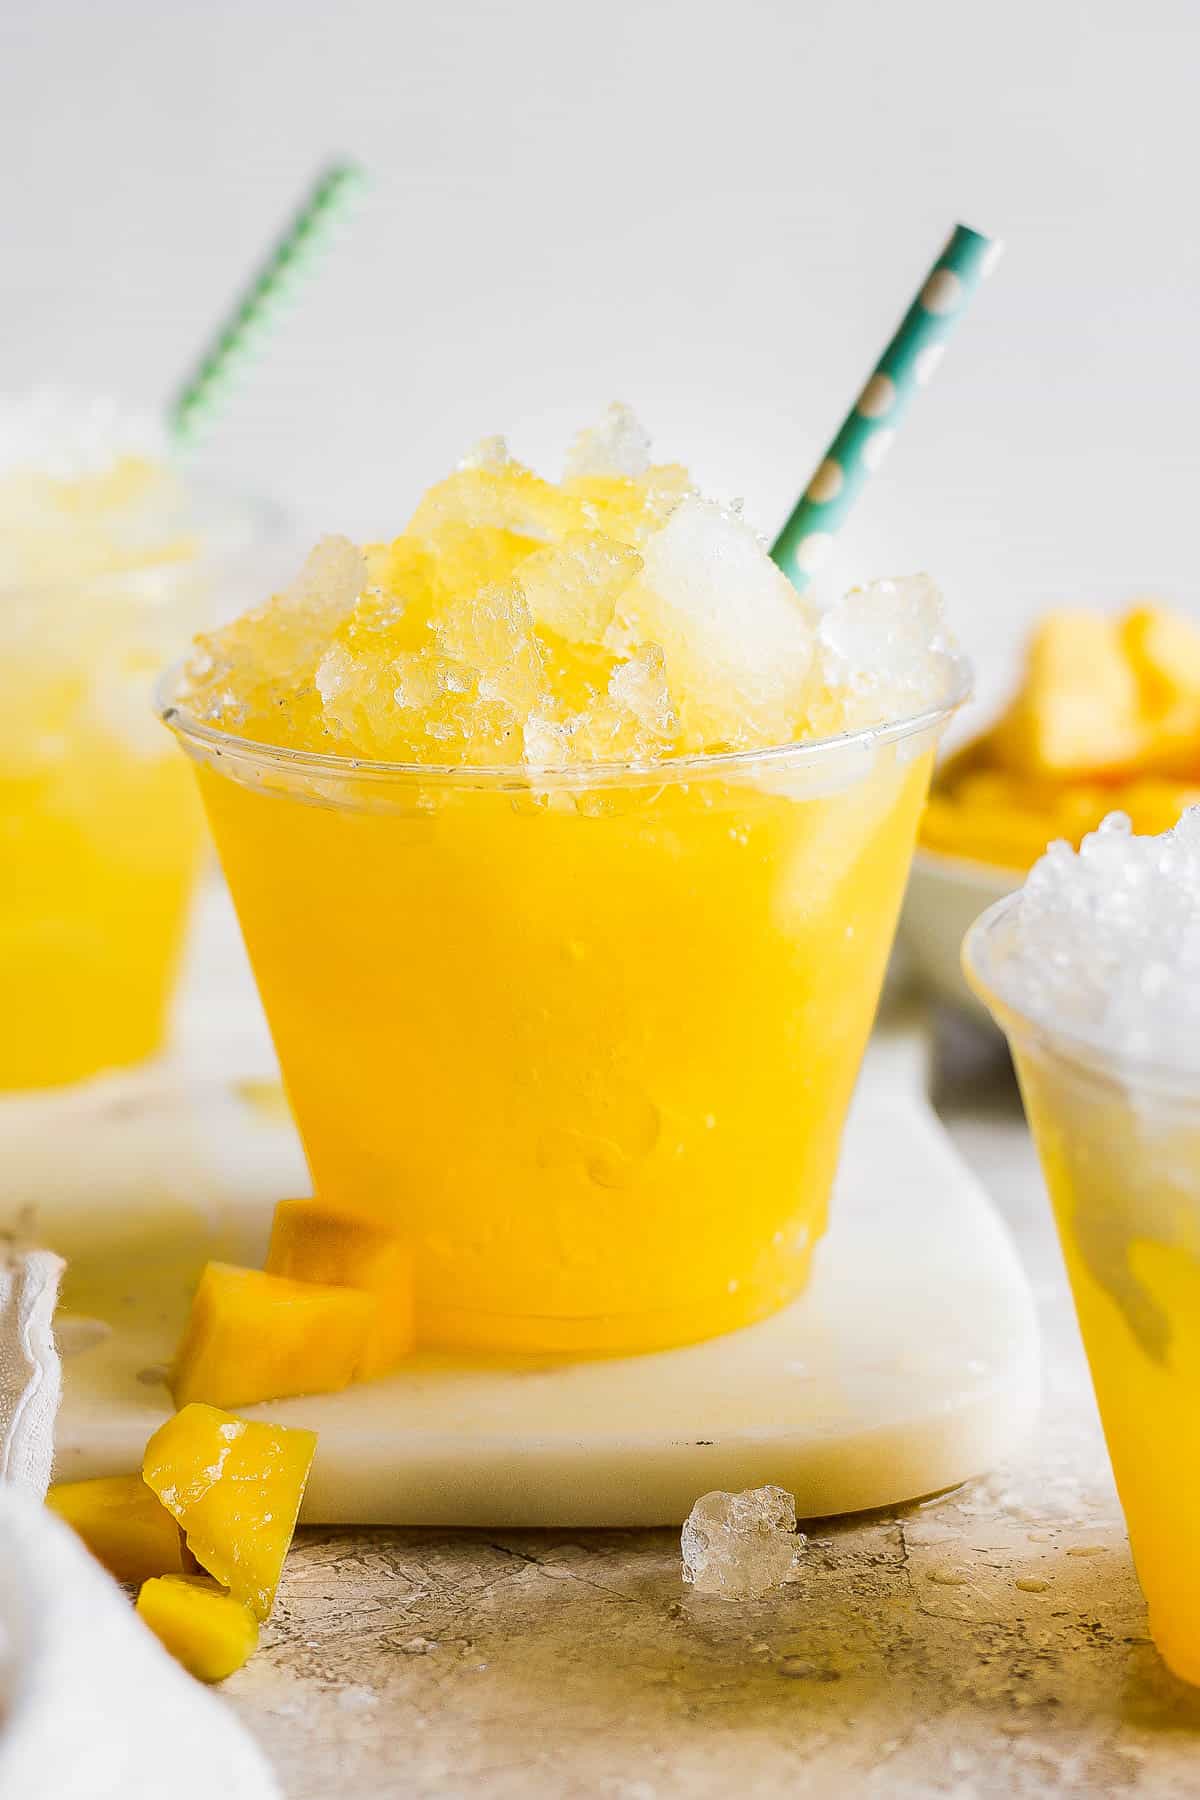 Raspados Mexicanos shaved ice in a cup with a straw made with a sweet mango syrup